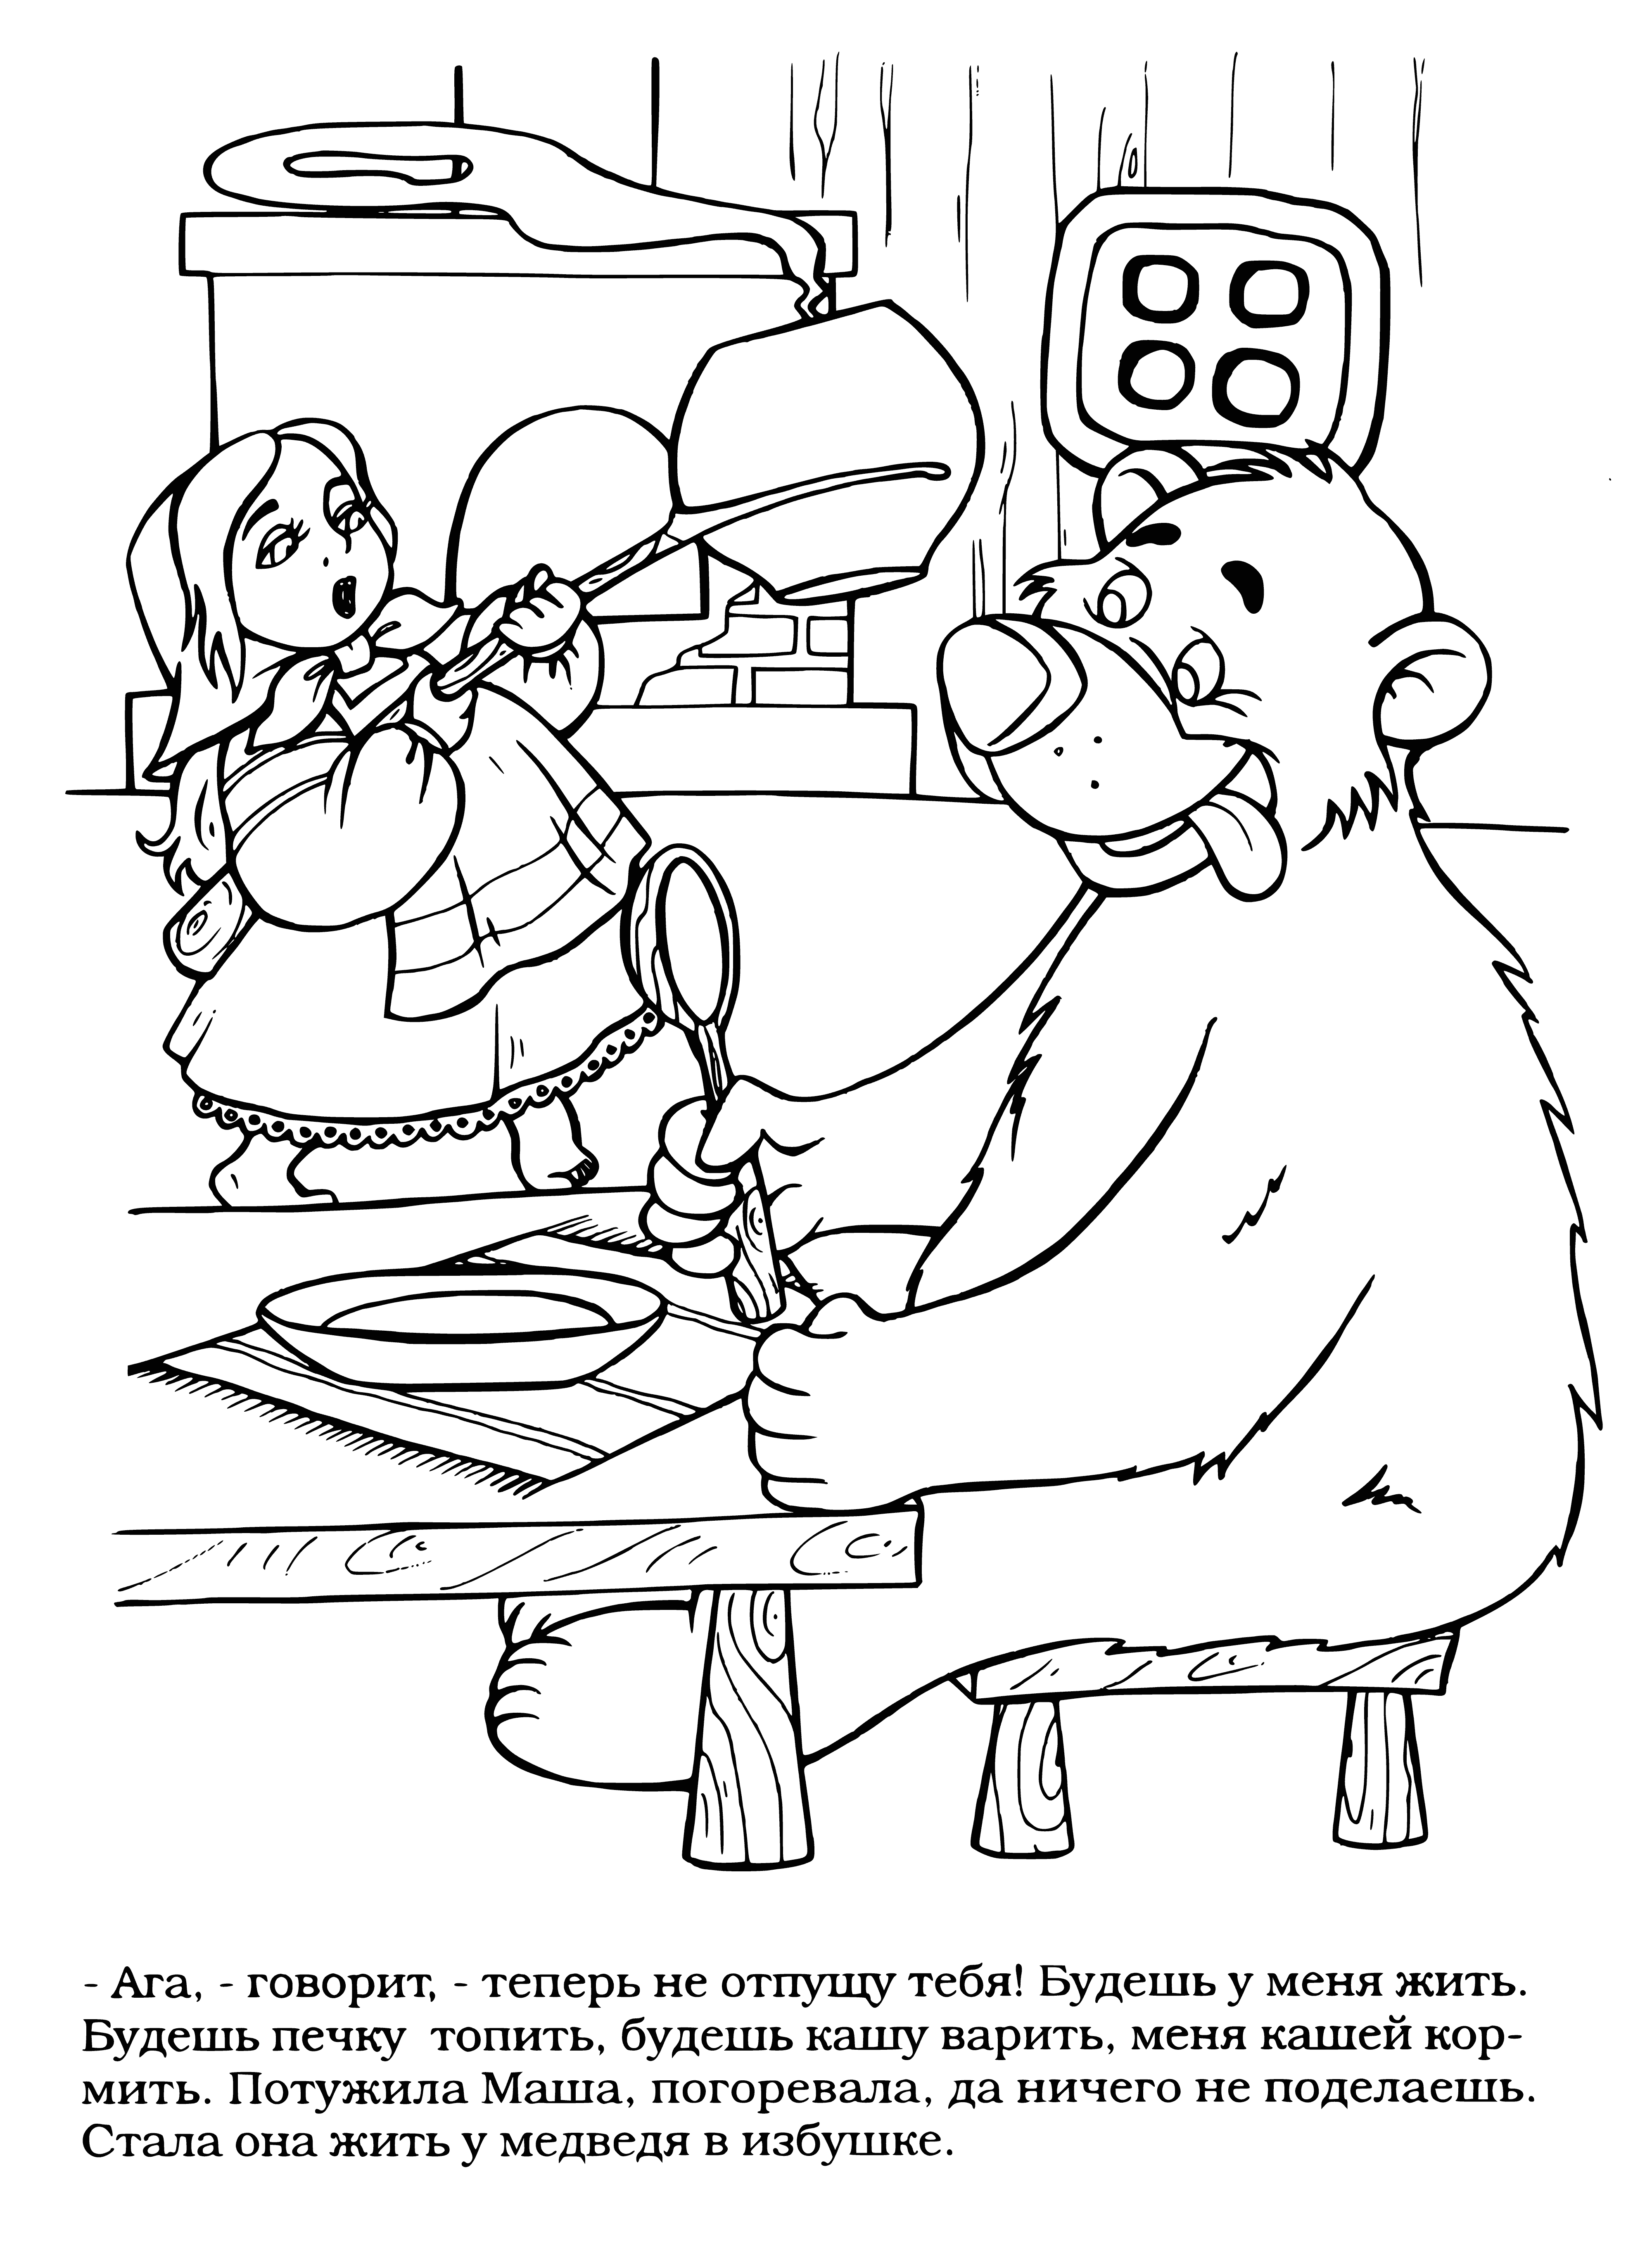 coloring page: Girl feeds bear from red bag while riding on its back in snowy mountain range. She wears traditional Russian headscarf.